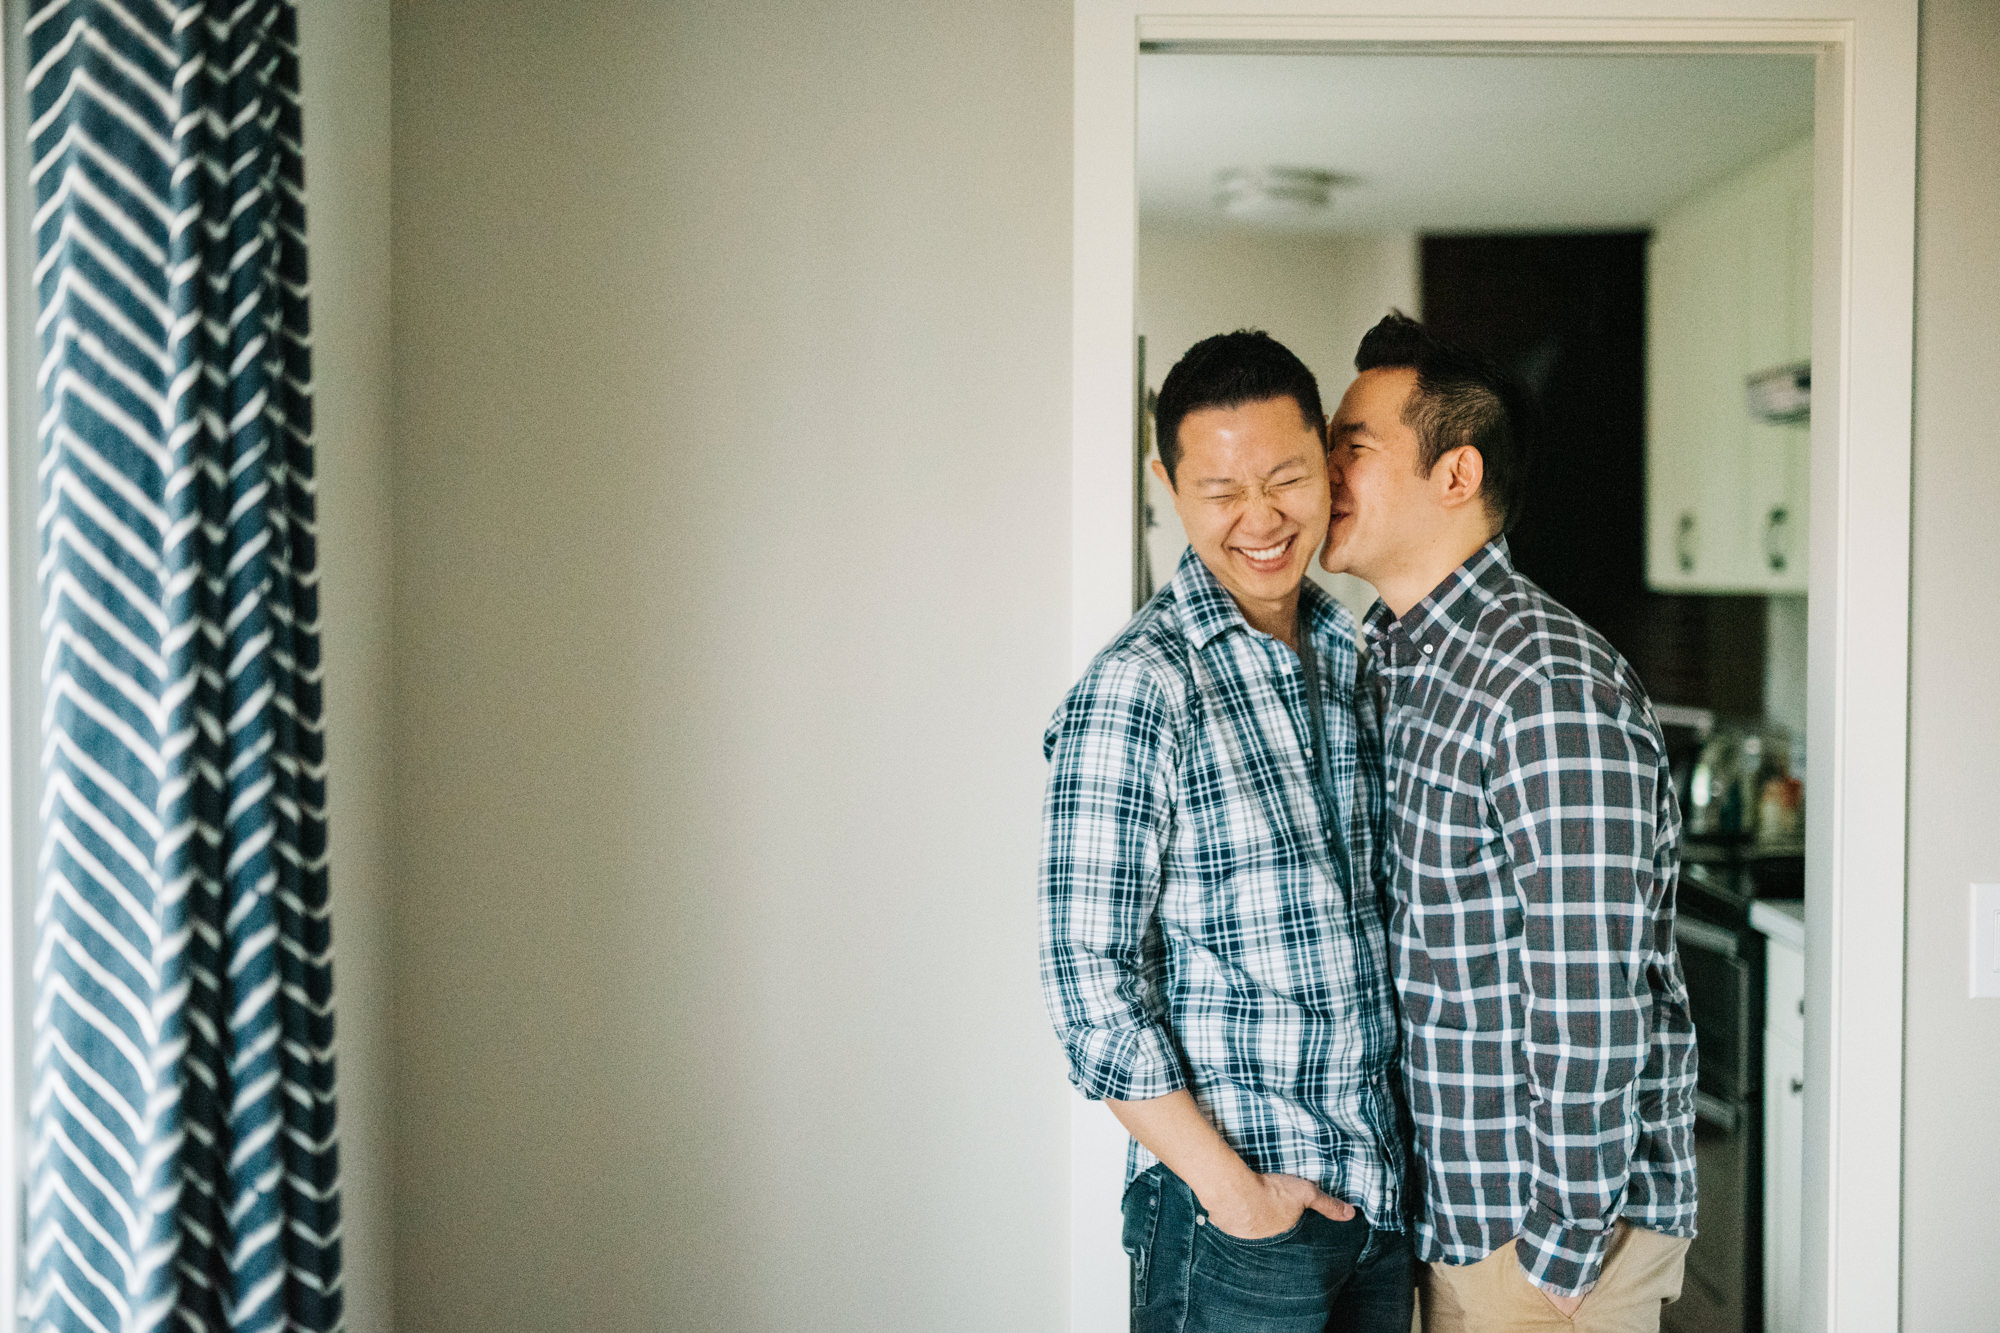 Seattle Wedding Photographers: Engagement Portraits with Robert and Wilson (2)